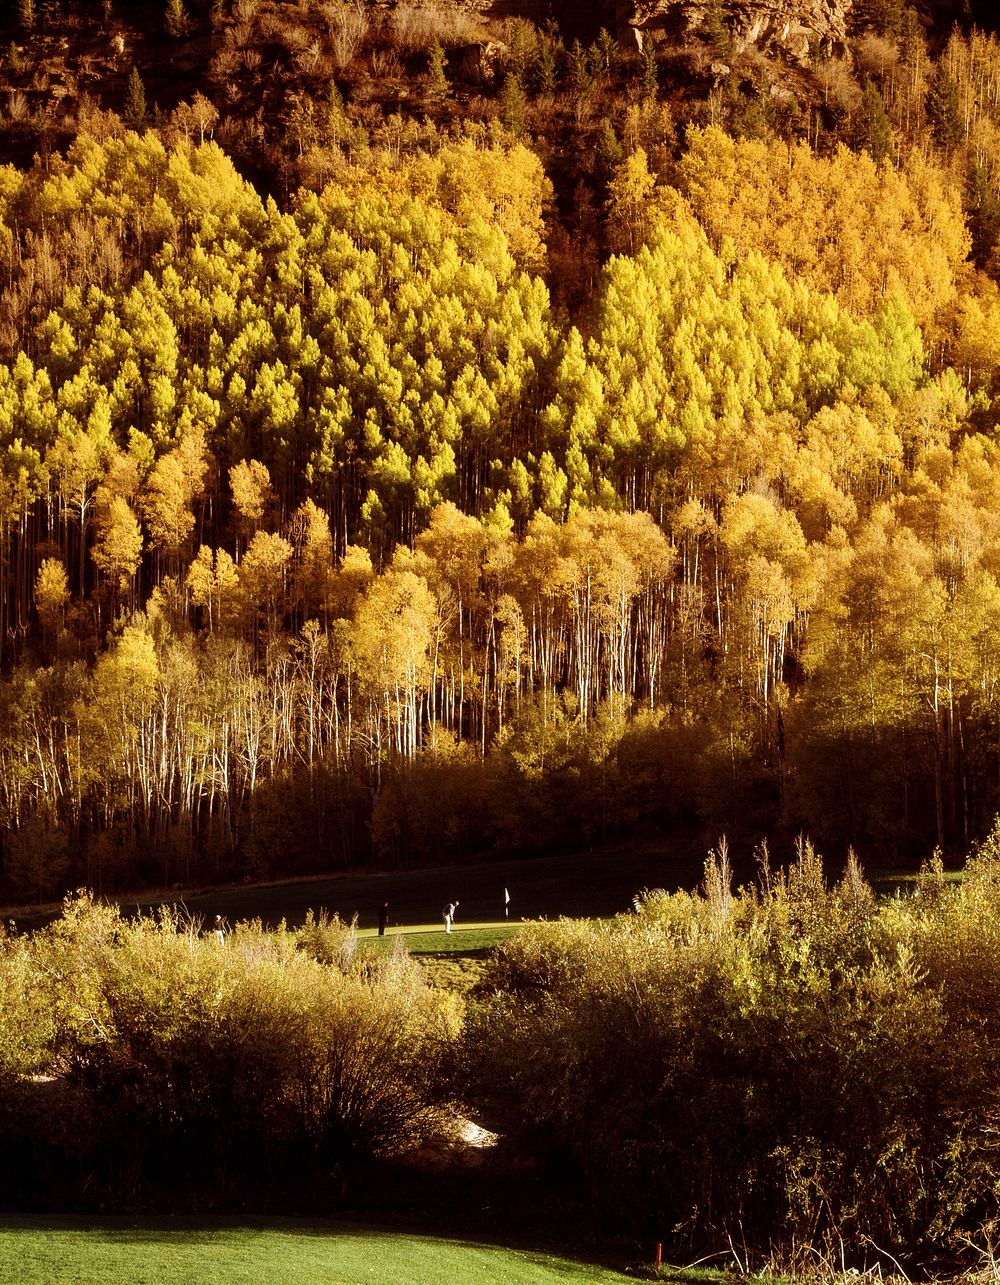 Aspens Over Vail, Colorado USA - Original image from Carol M. Highsmith&rsquo;s America, Library of Congress collection.…